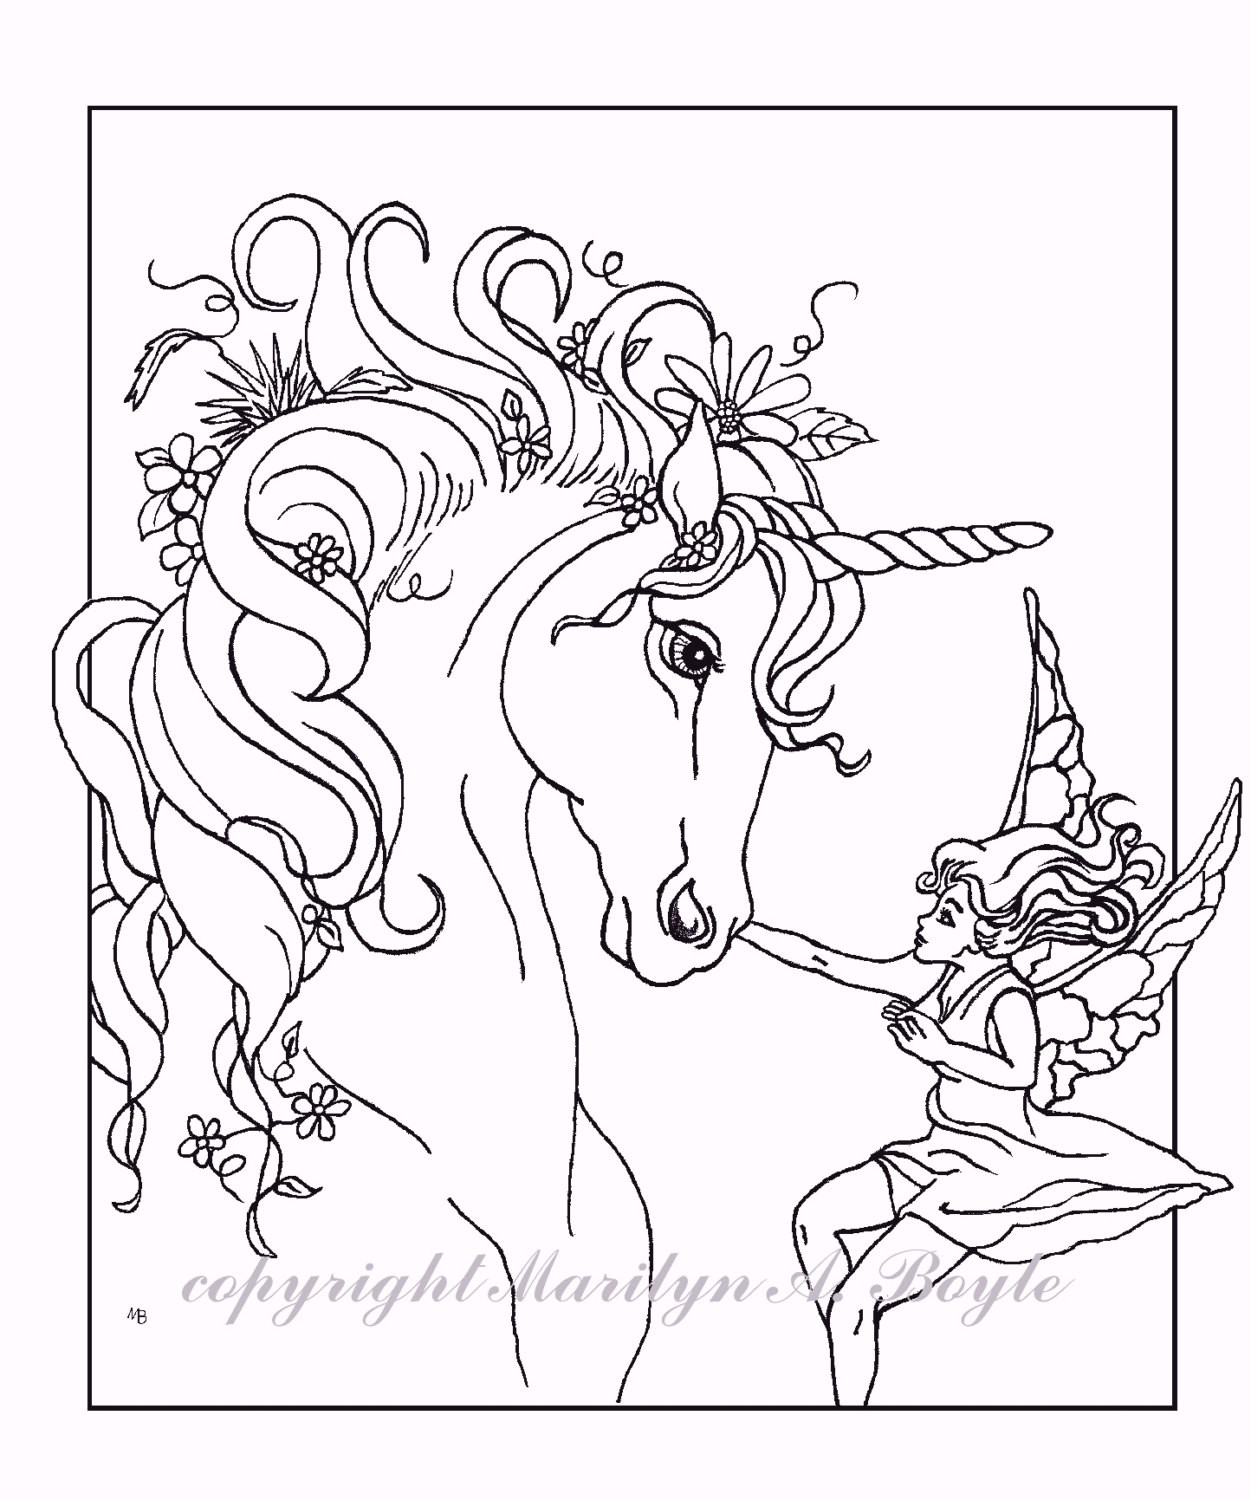 Free Printable Coloring Pages Of Unicorns
 ADULT COLORING PAGE fantasy unicorn fairy digital